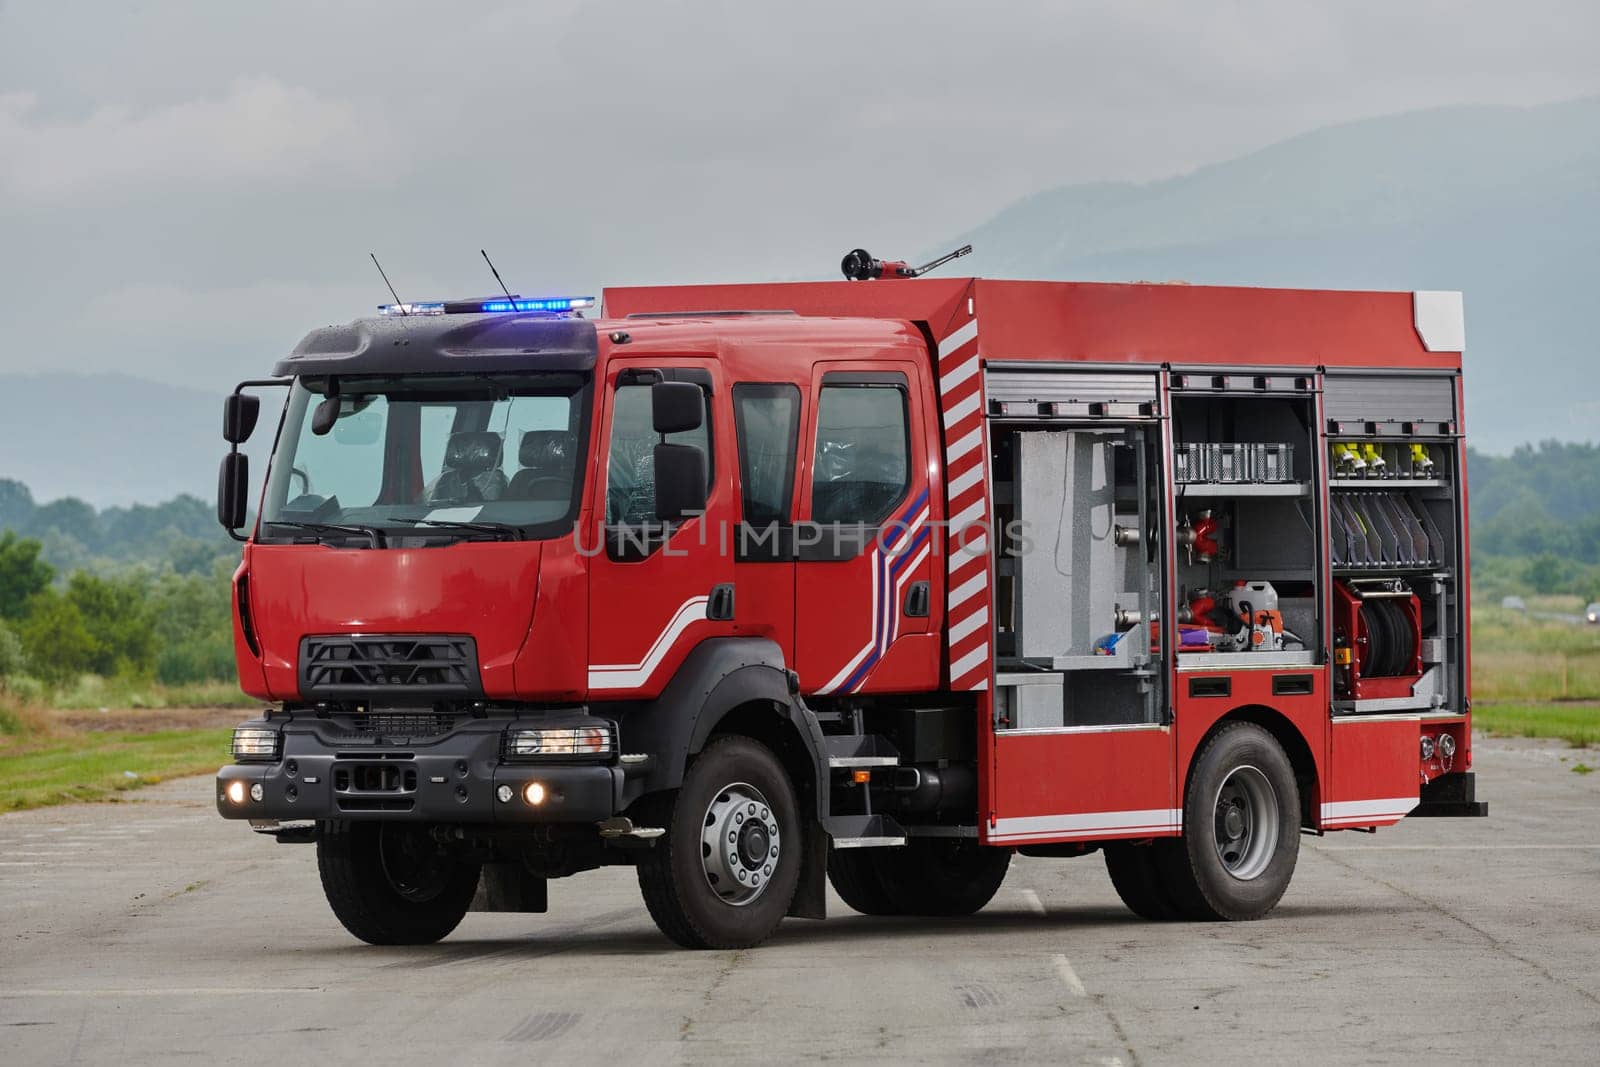 In this captivating scene, a state-of-the-art firetruck, equipped with advanced rescue technology, stands ready with its skilled firefighting team, prepared to intervene and respond rapidly to emergencies, ensuring the safety and protection of the community by dotshock